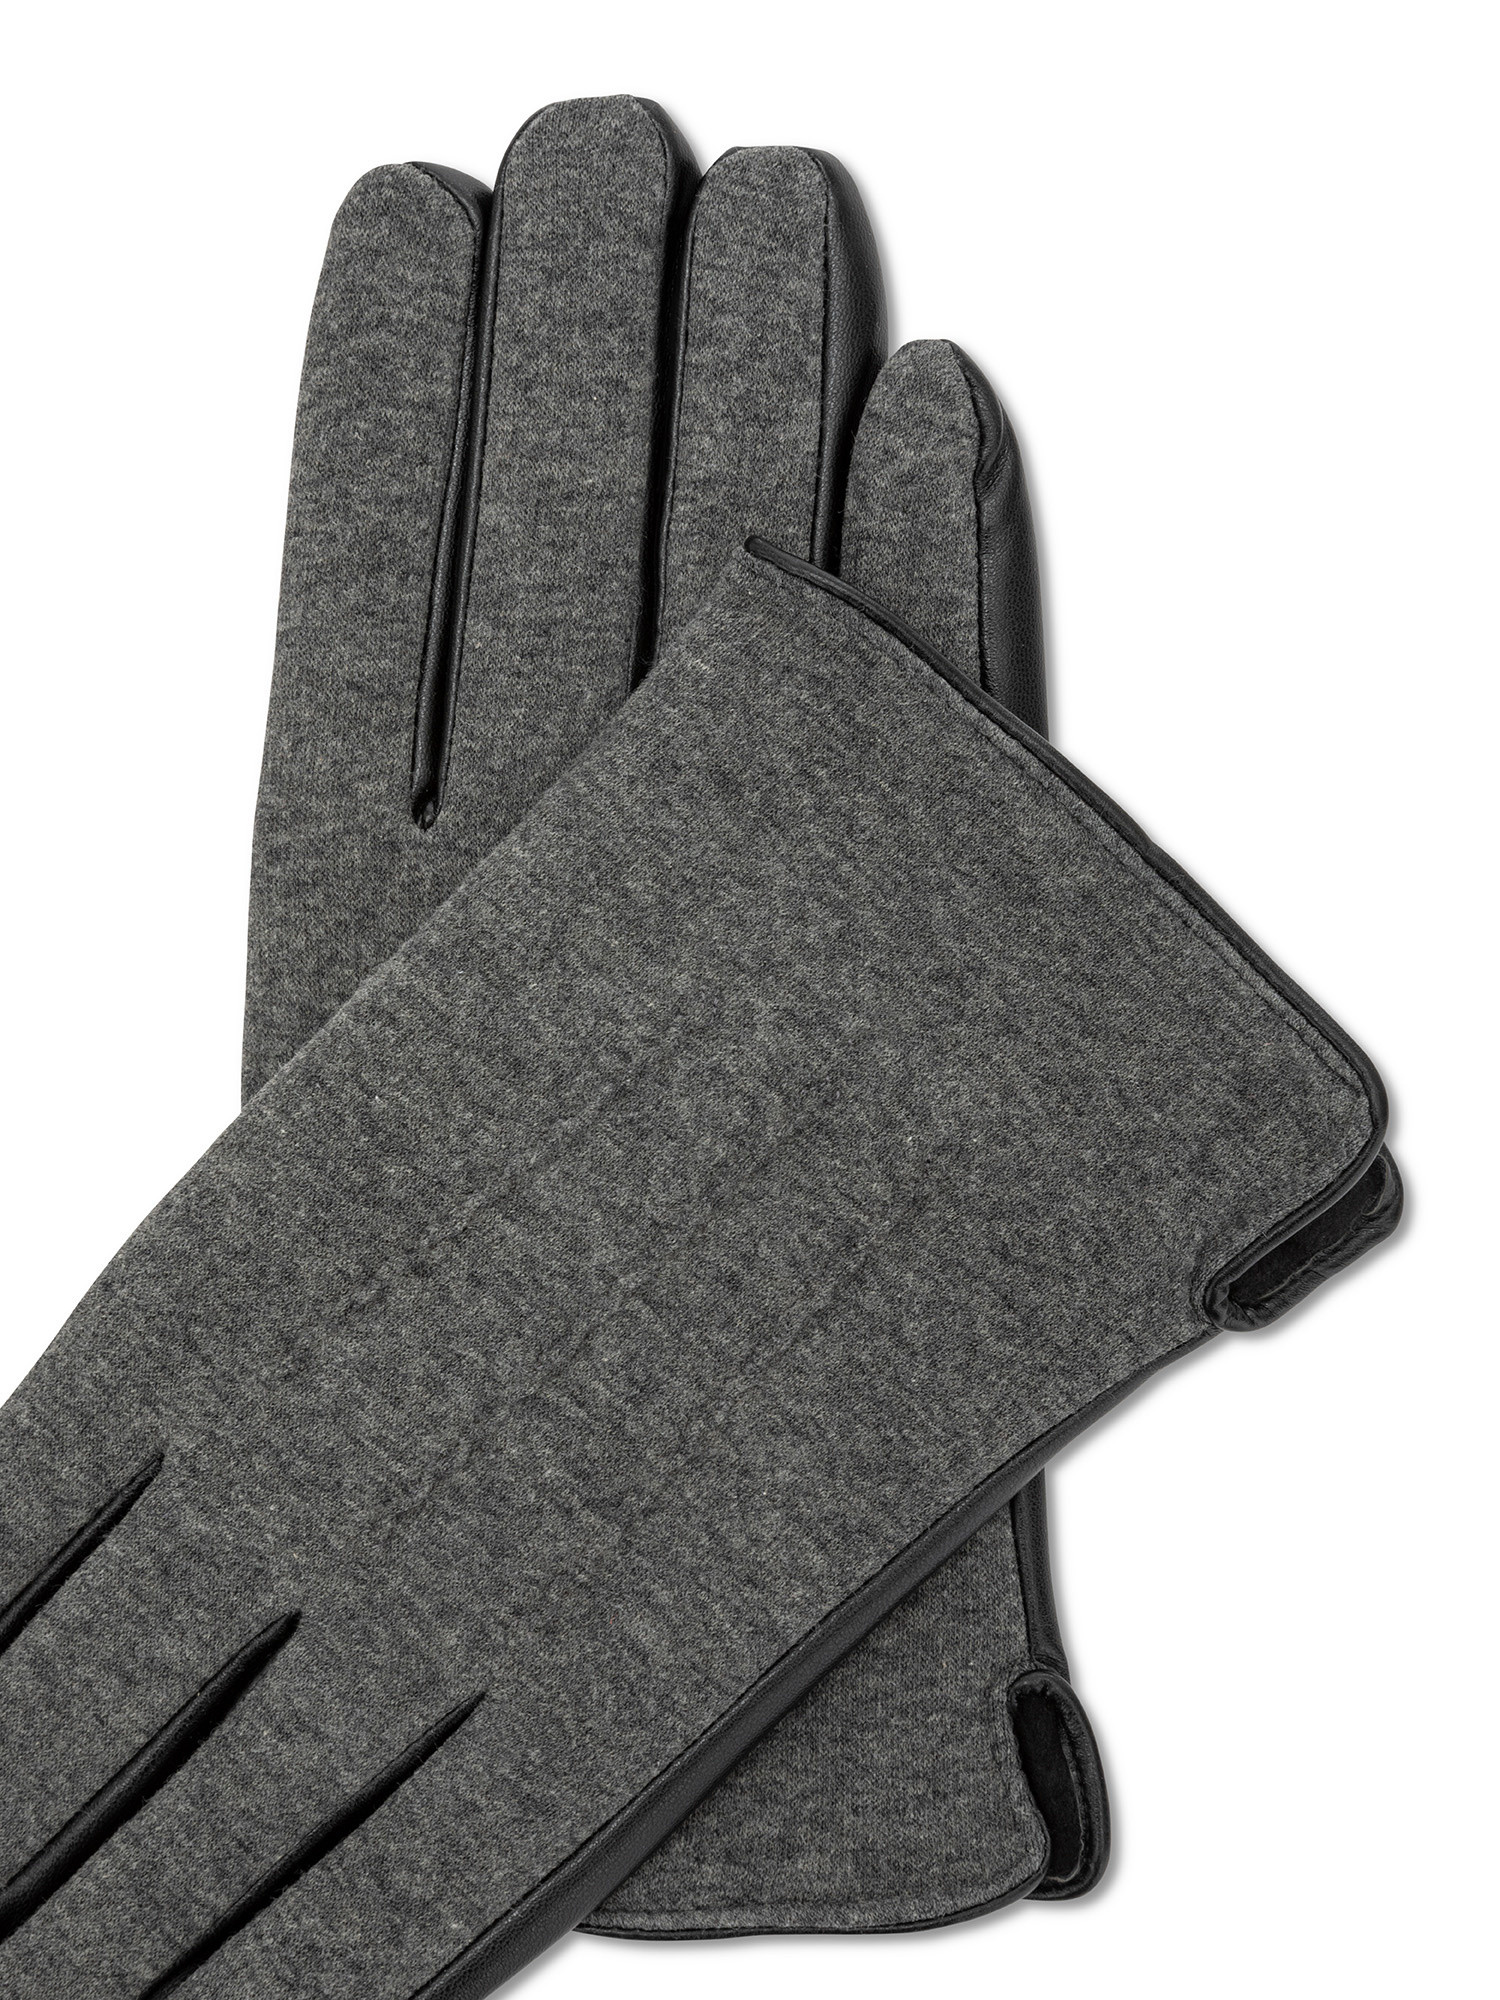 Luca D'Altieri - Gloves in jersey and eco-leather, Grey, large image number 1